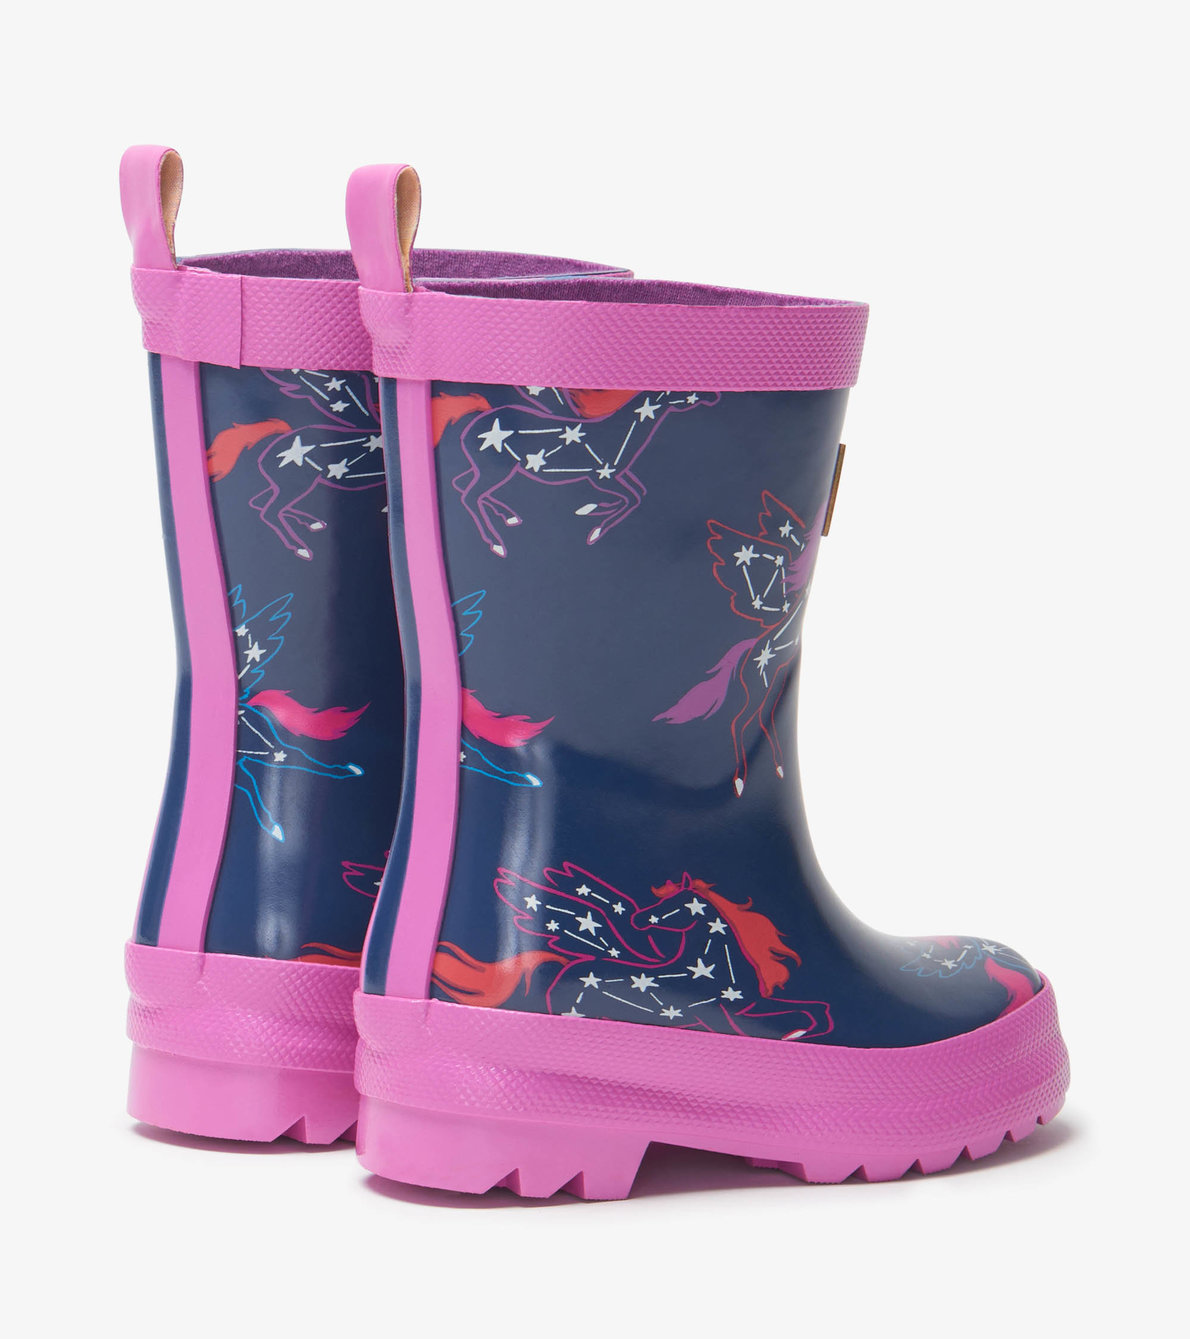 View larger image of My 1st Wellies - Pegasus Constellations